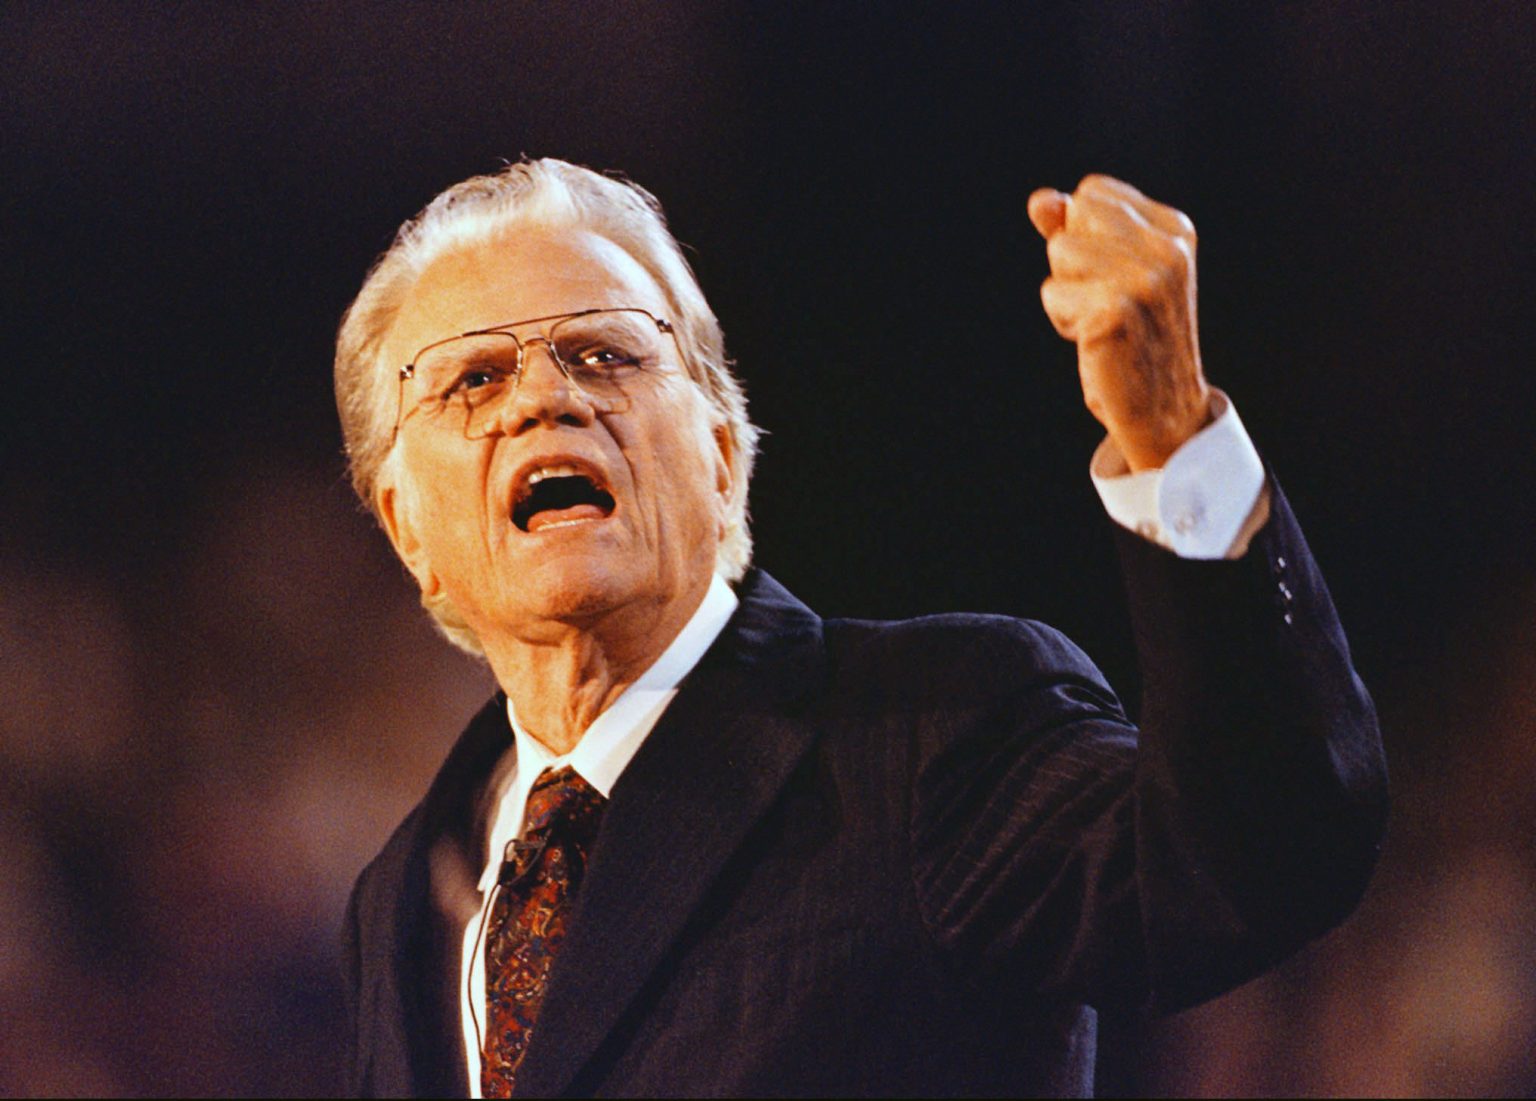 DOWNLOAD MP3: The Power of Repentance by Evangelist BILLY GRAHAM (Sermon) 7